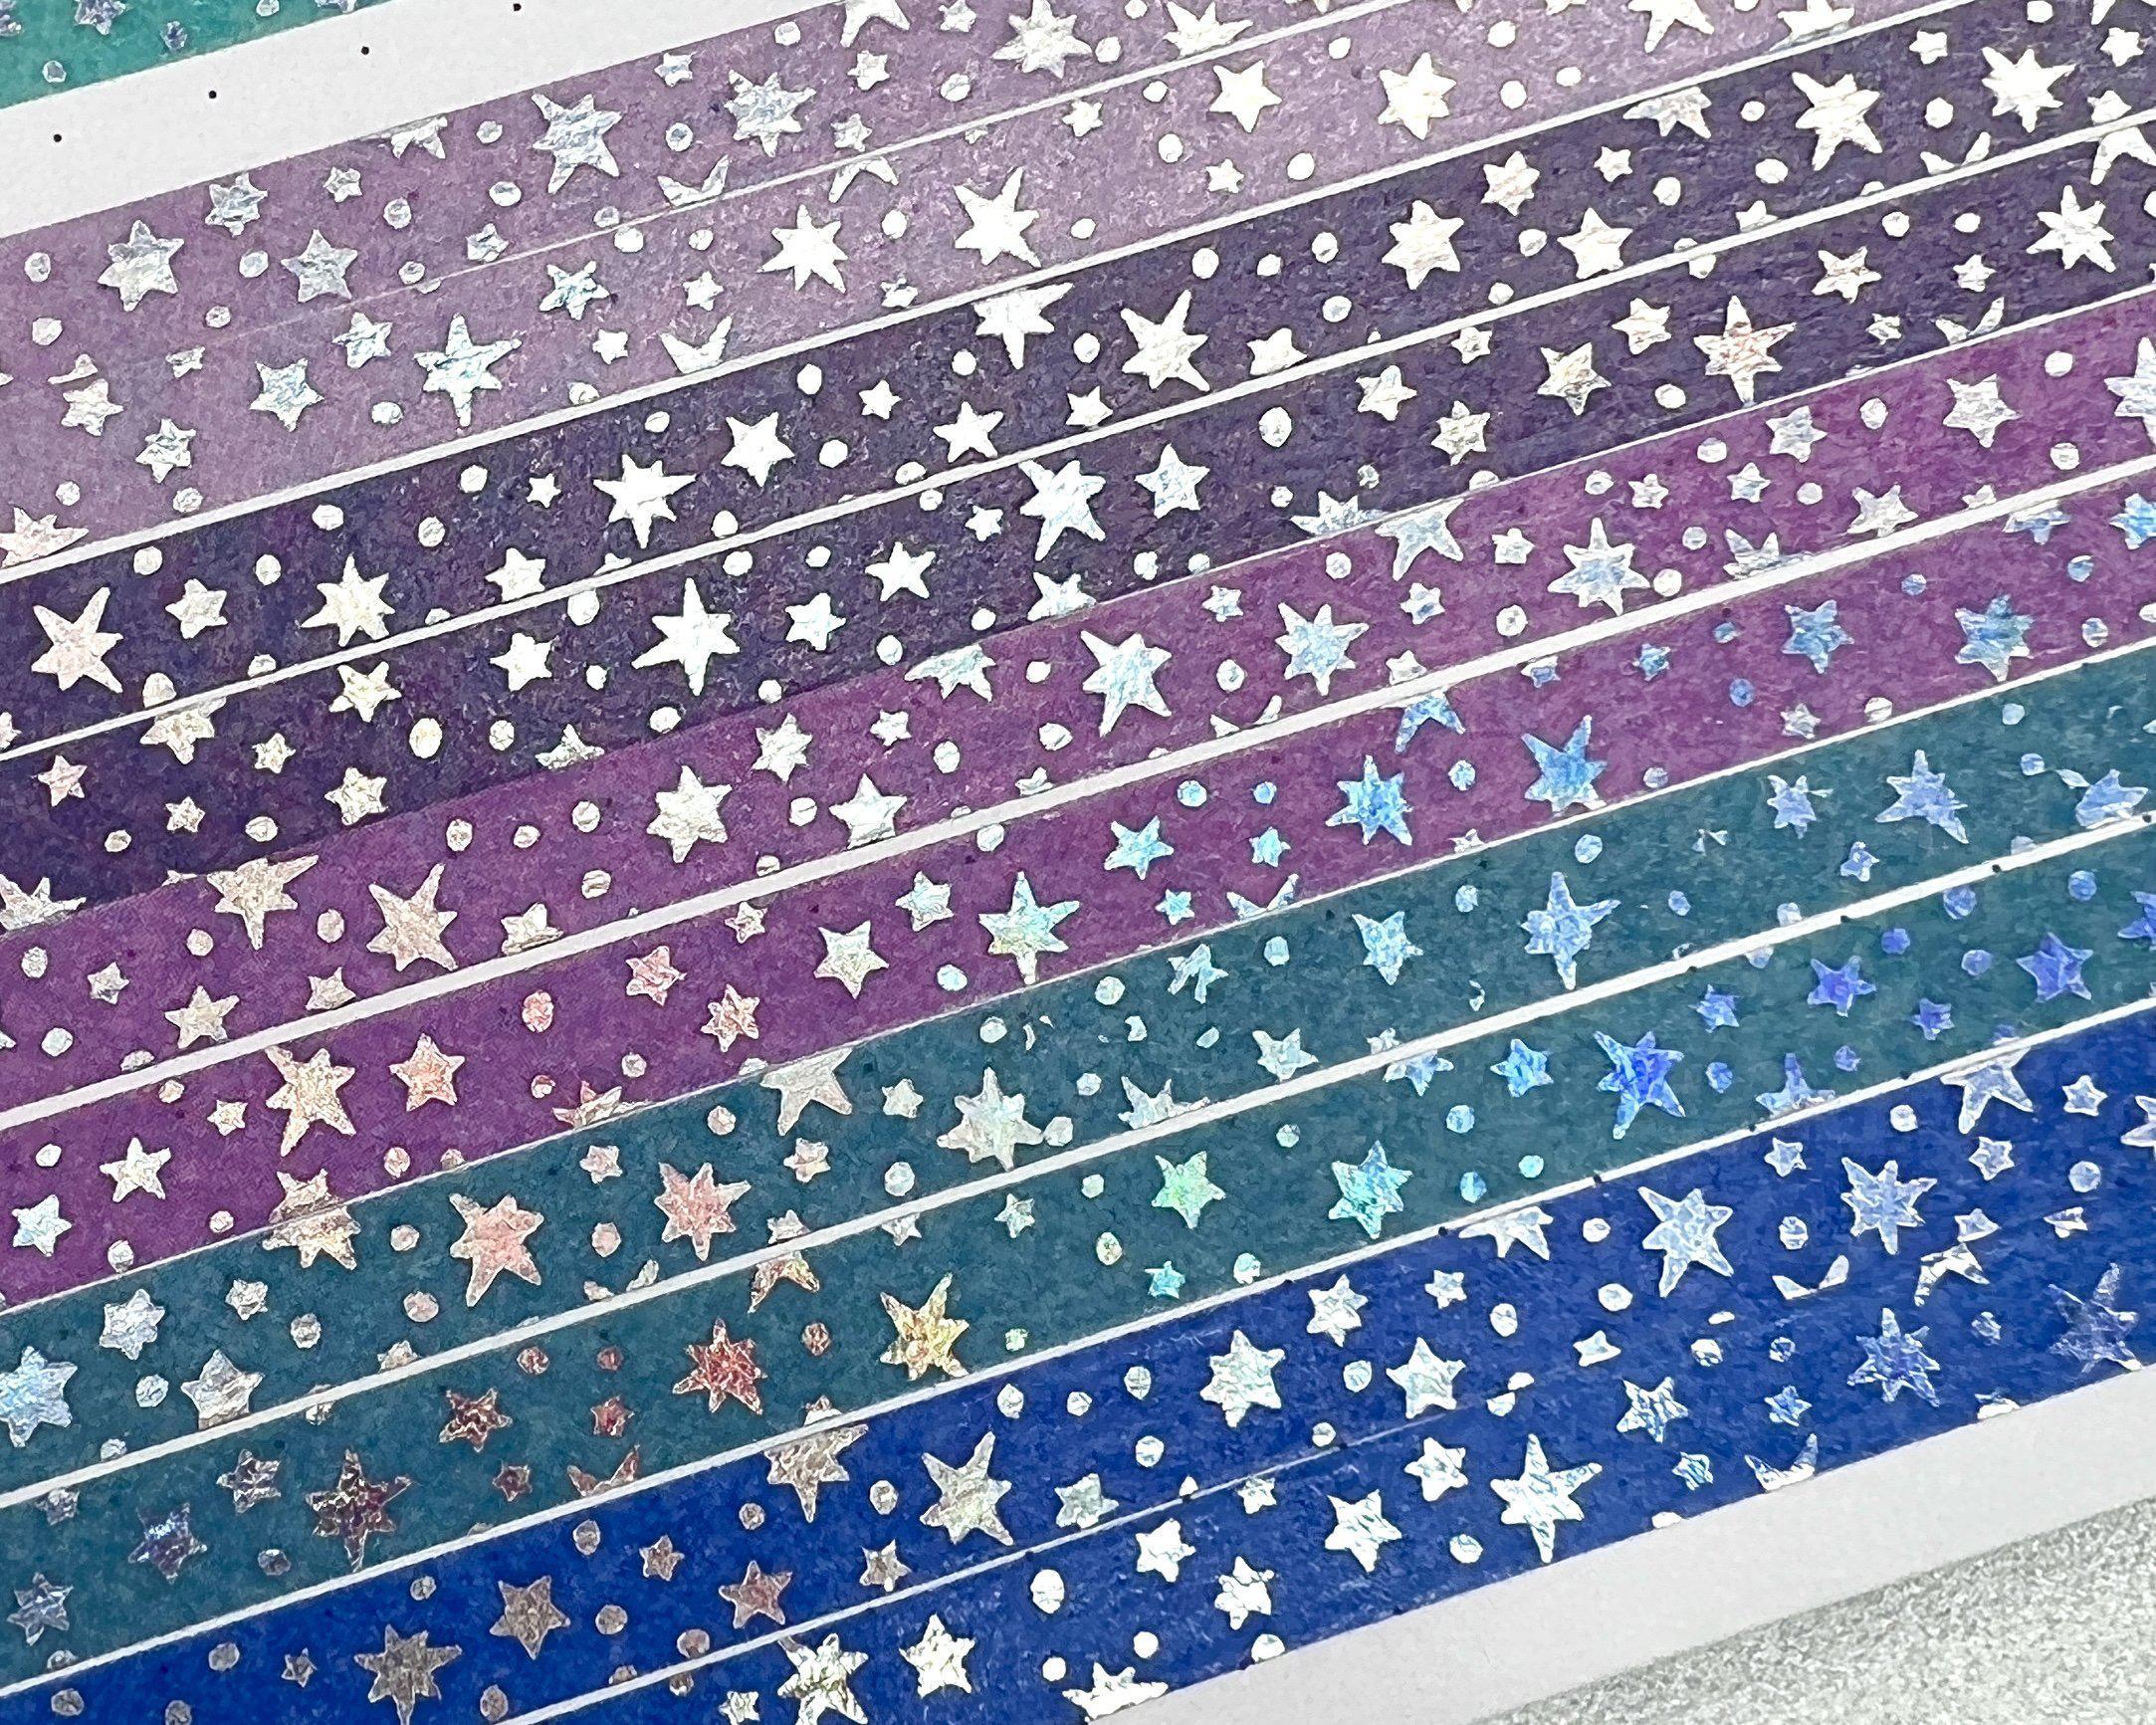 Cozy Winter Washi Tape Collection Silver Holo Foil